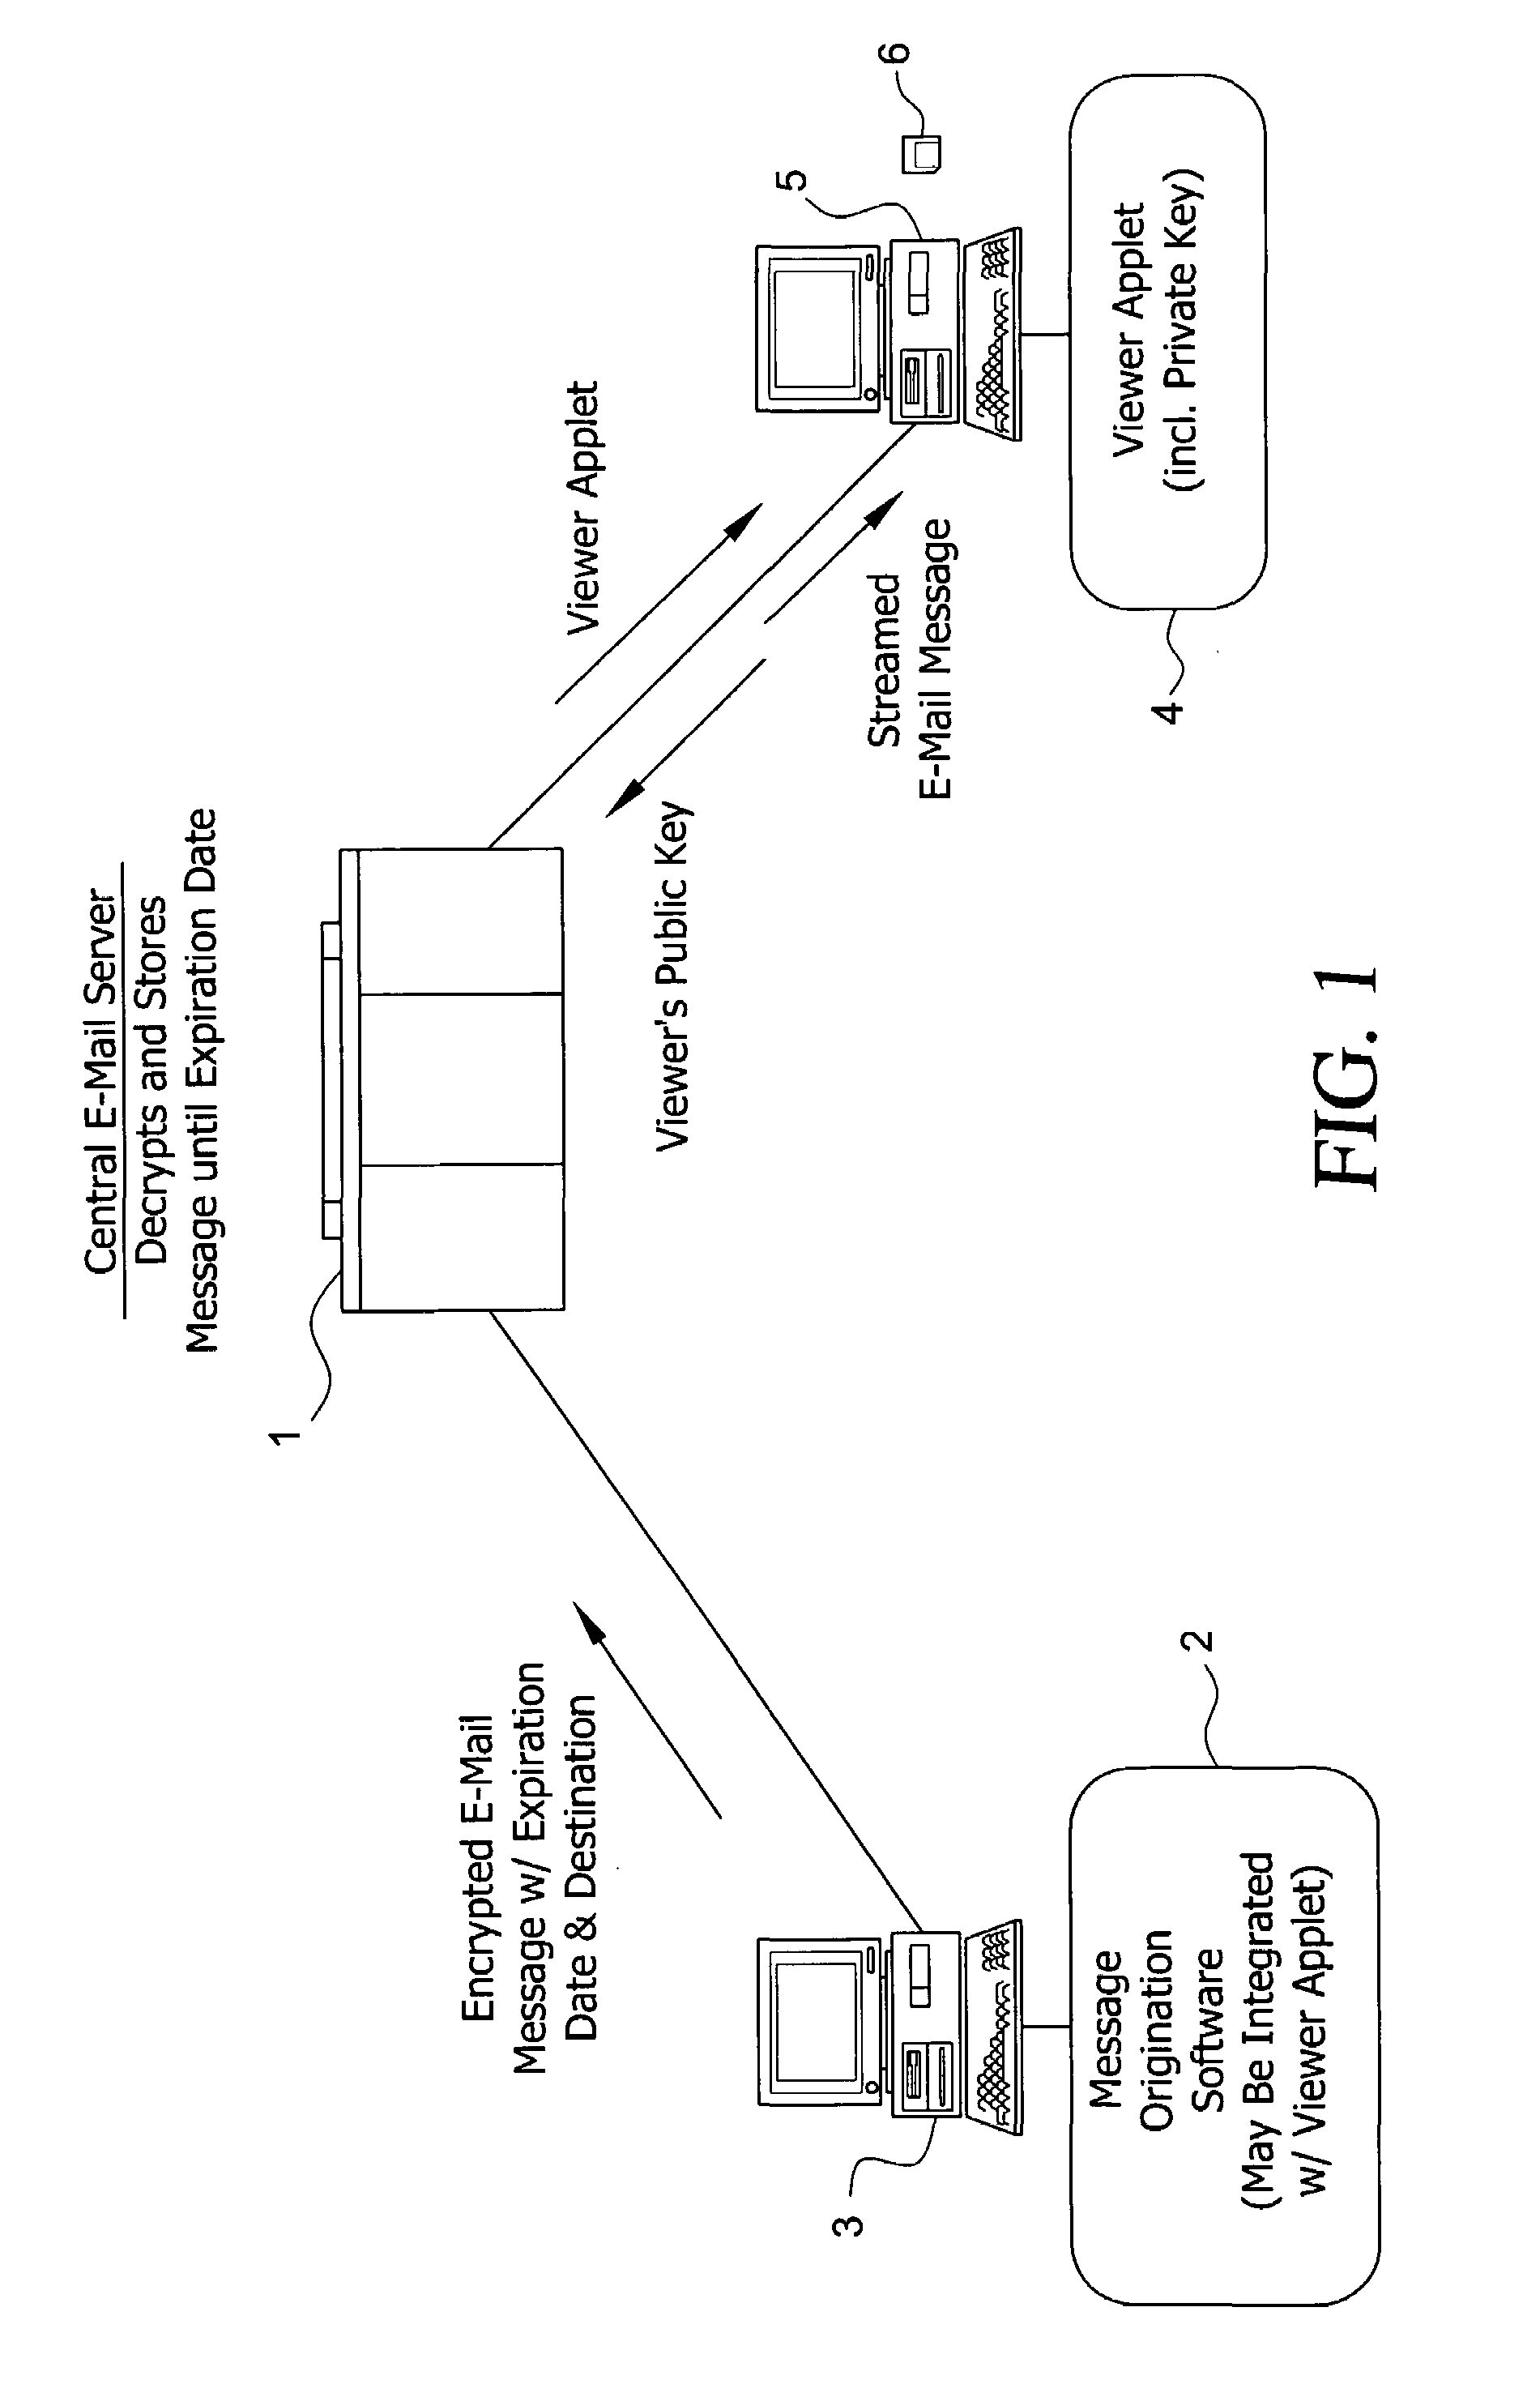 System and method for enabling the originator of an electronic mail message to preset an expiration time, date, and/or event, and to control processing or handling by a recipient